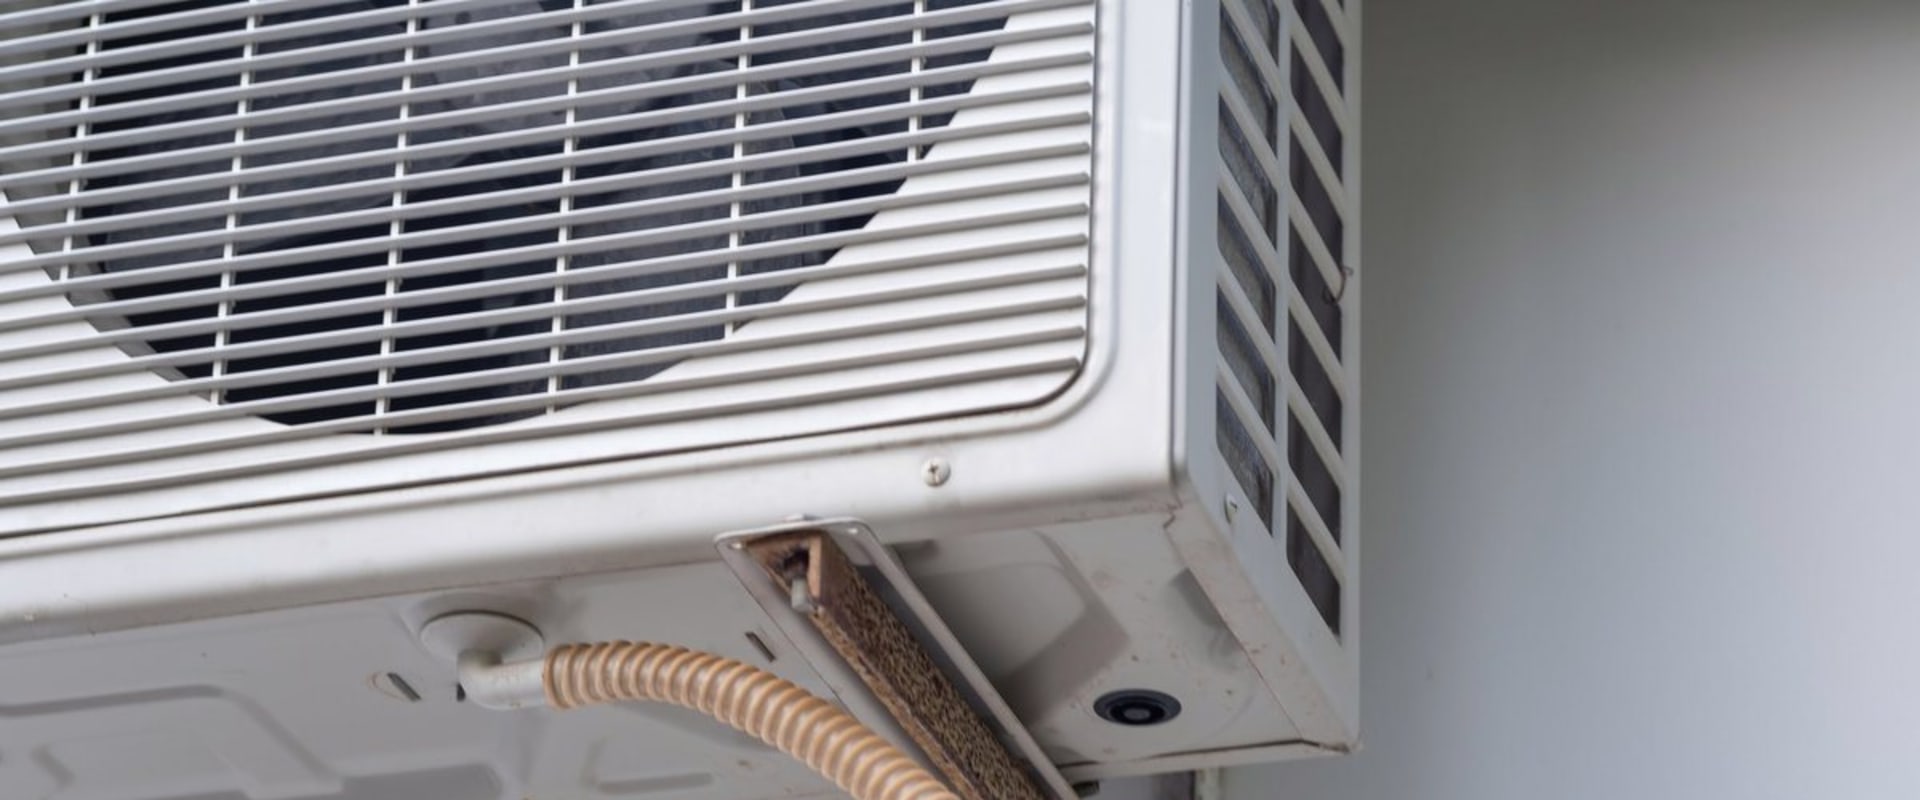 How much should air conditioning maintenance cost?